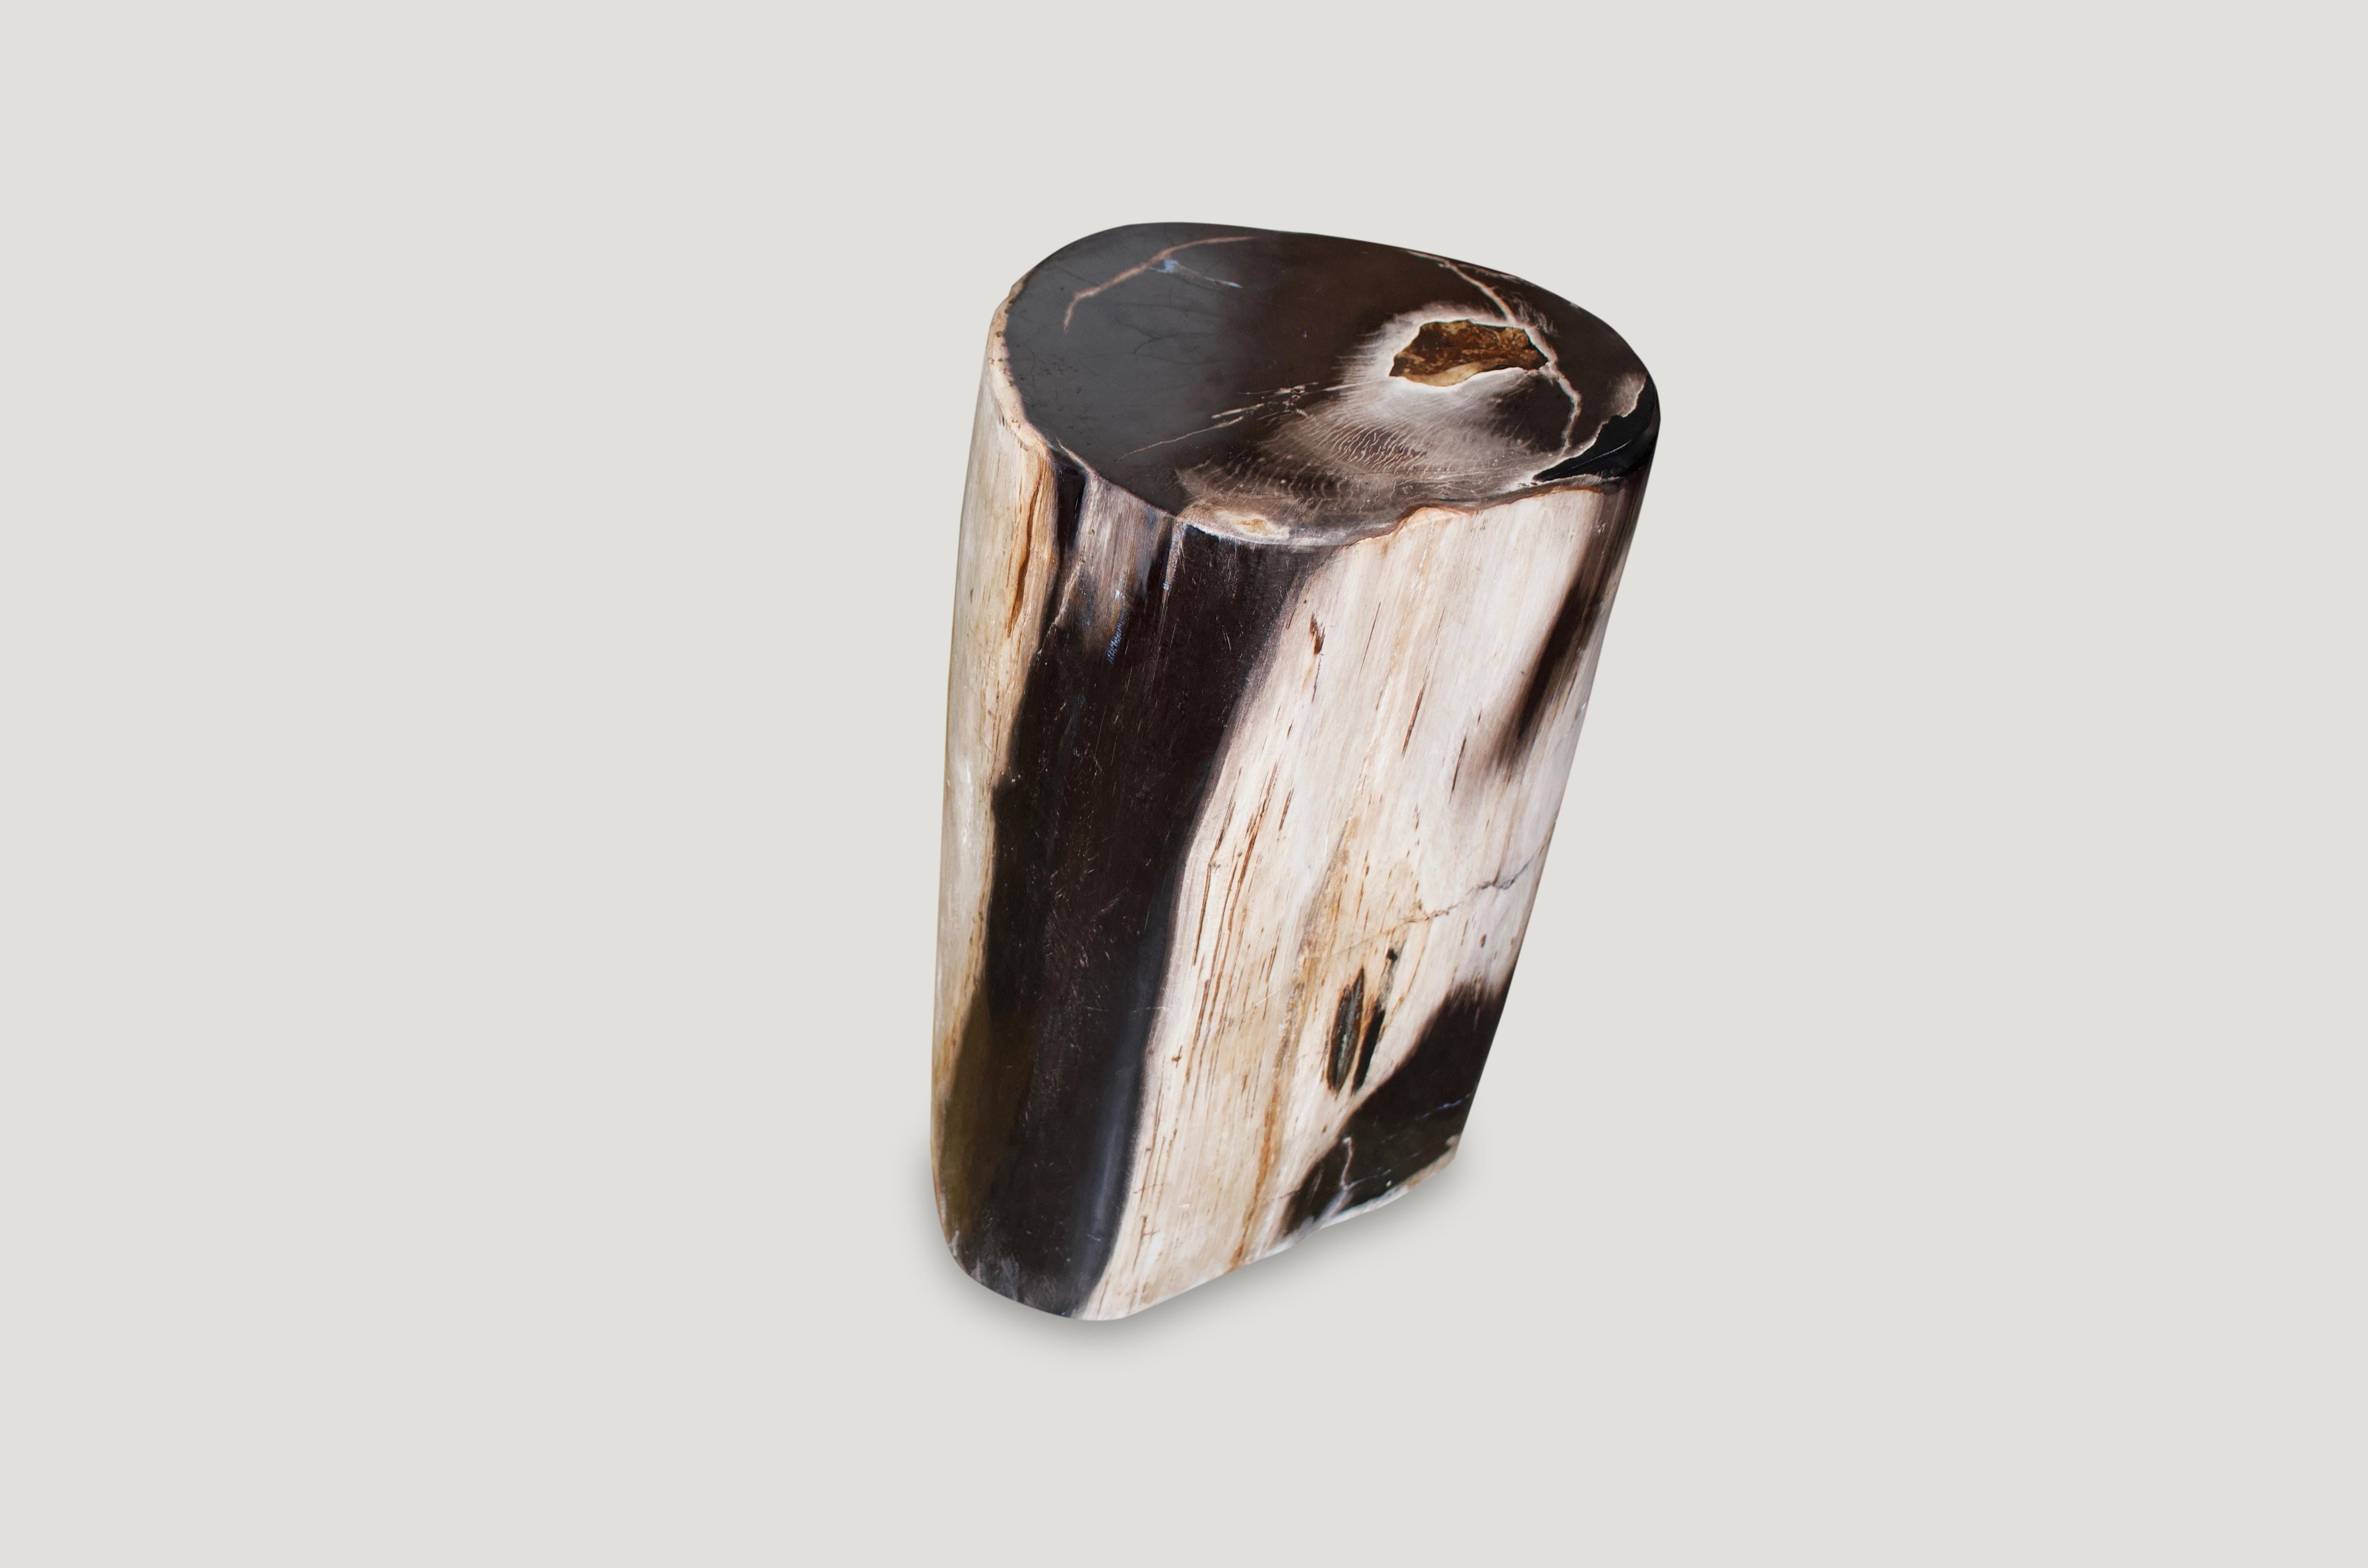 Beautiful high quality petrified wood side table with contrasting tones. We added resin to the top which is multifaceted. Stunning.

We source the highest quality petrified wood available. Over 40 million years old. Each piece is hand selected and